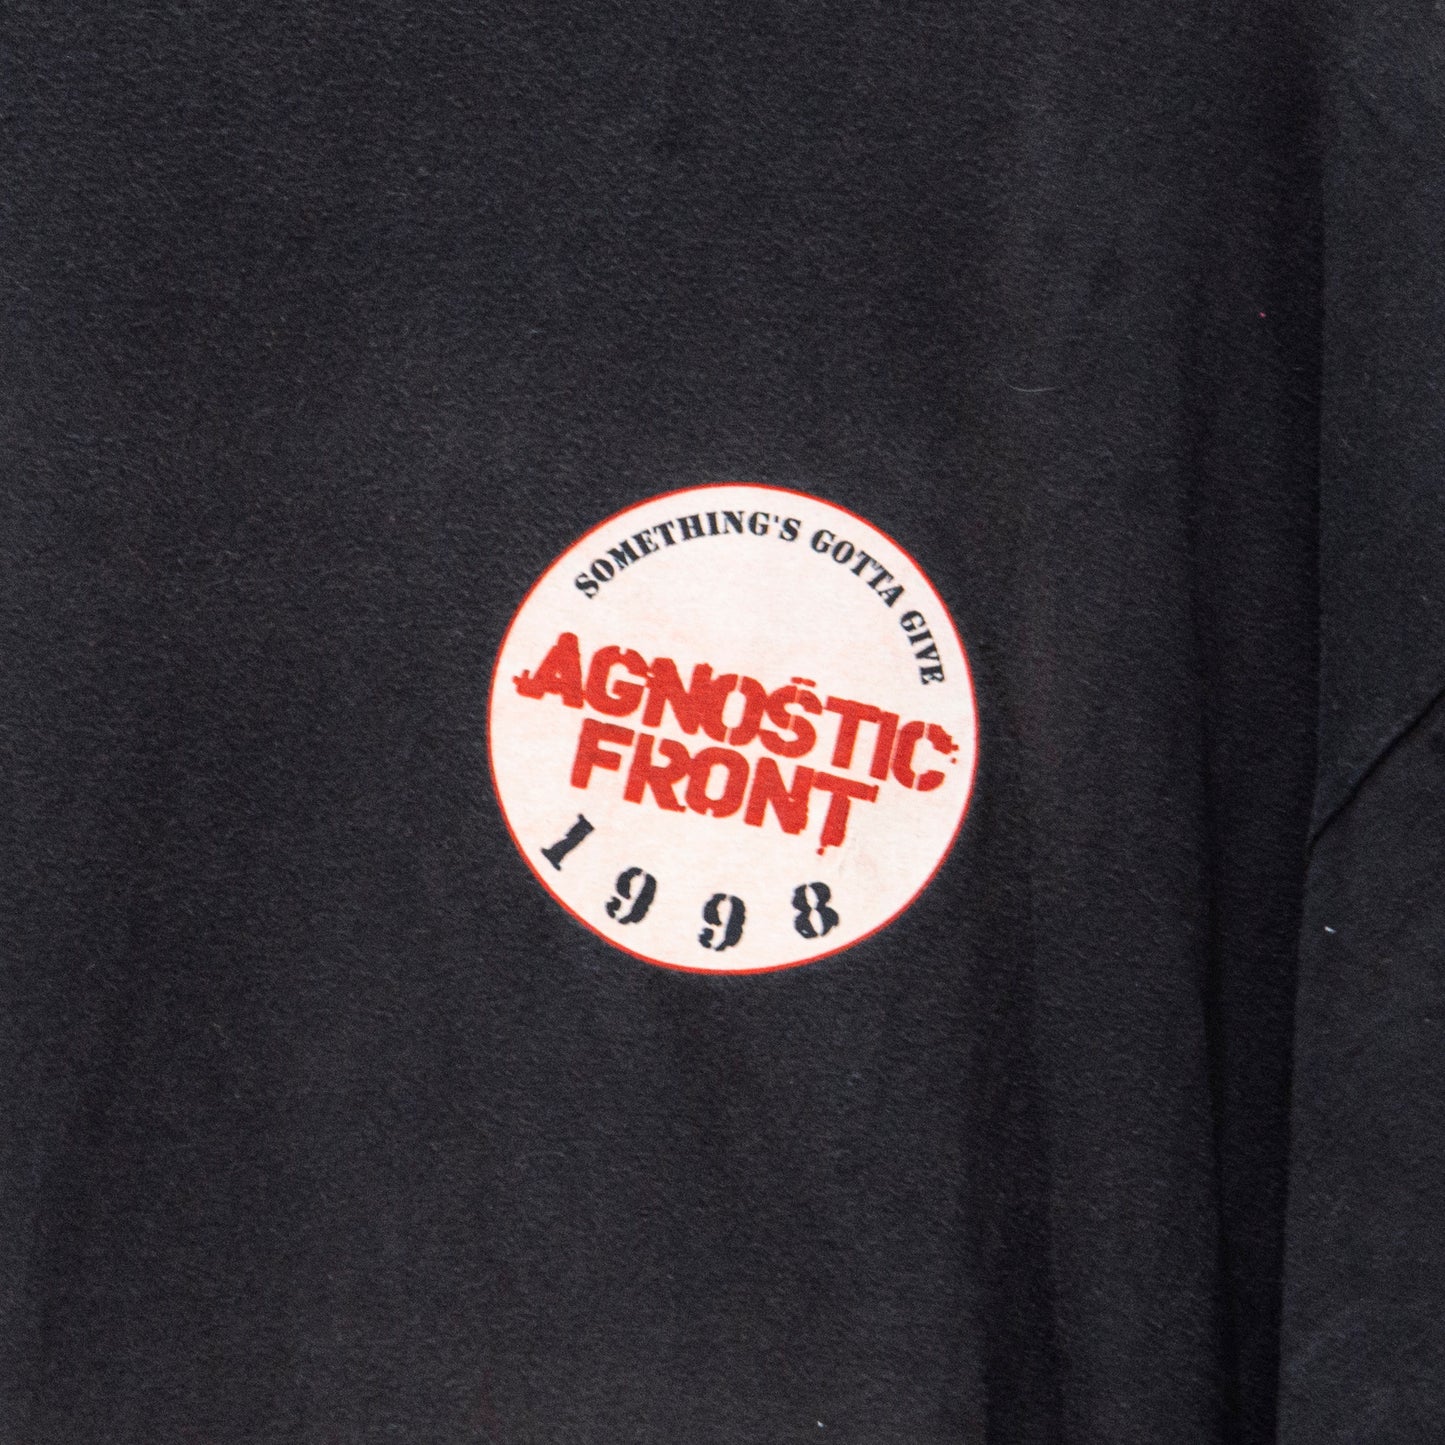 1998 Agnostic Front 'Something's Gotta Give' T-Shirt Boxy XL